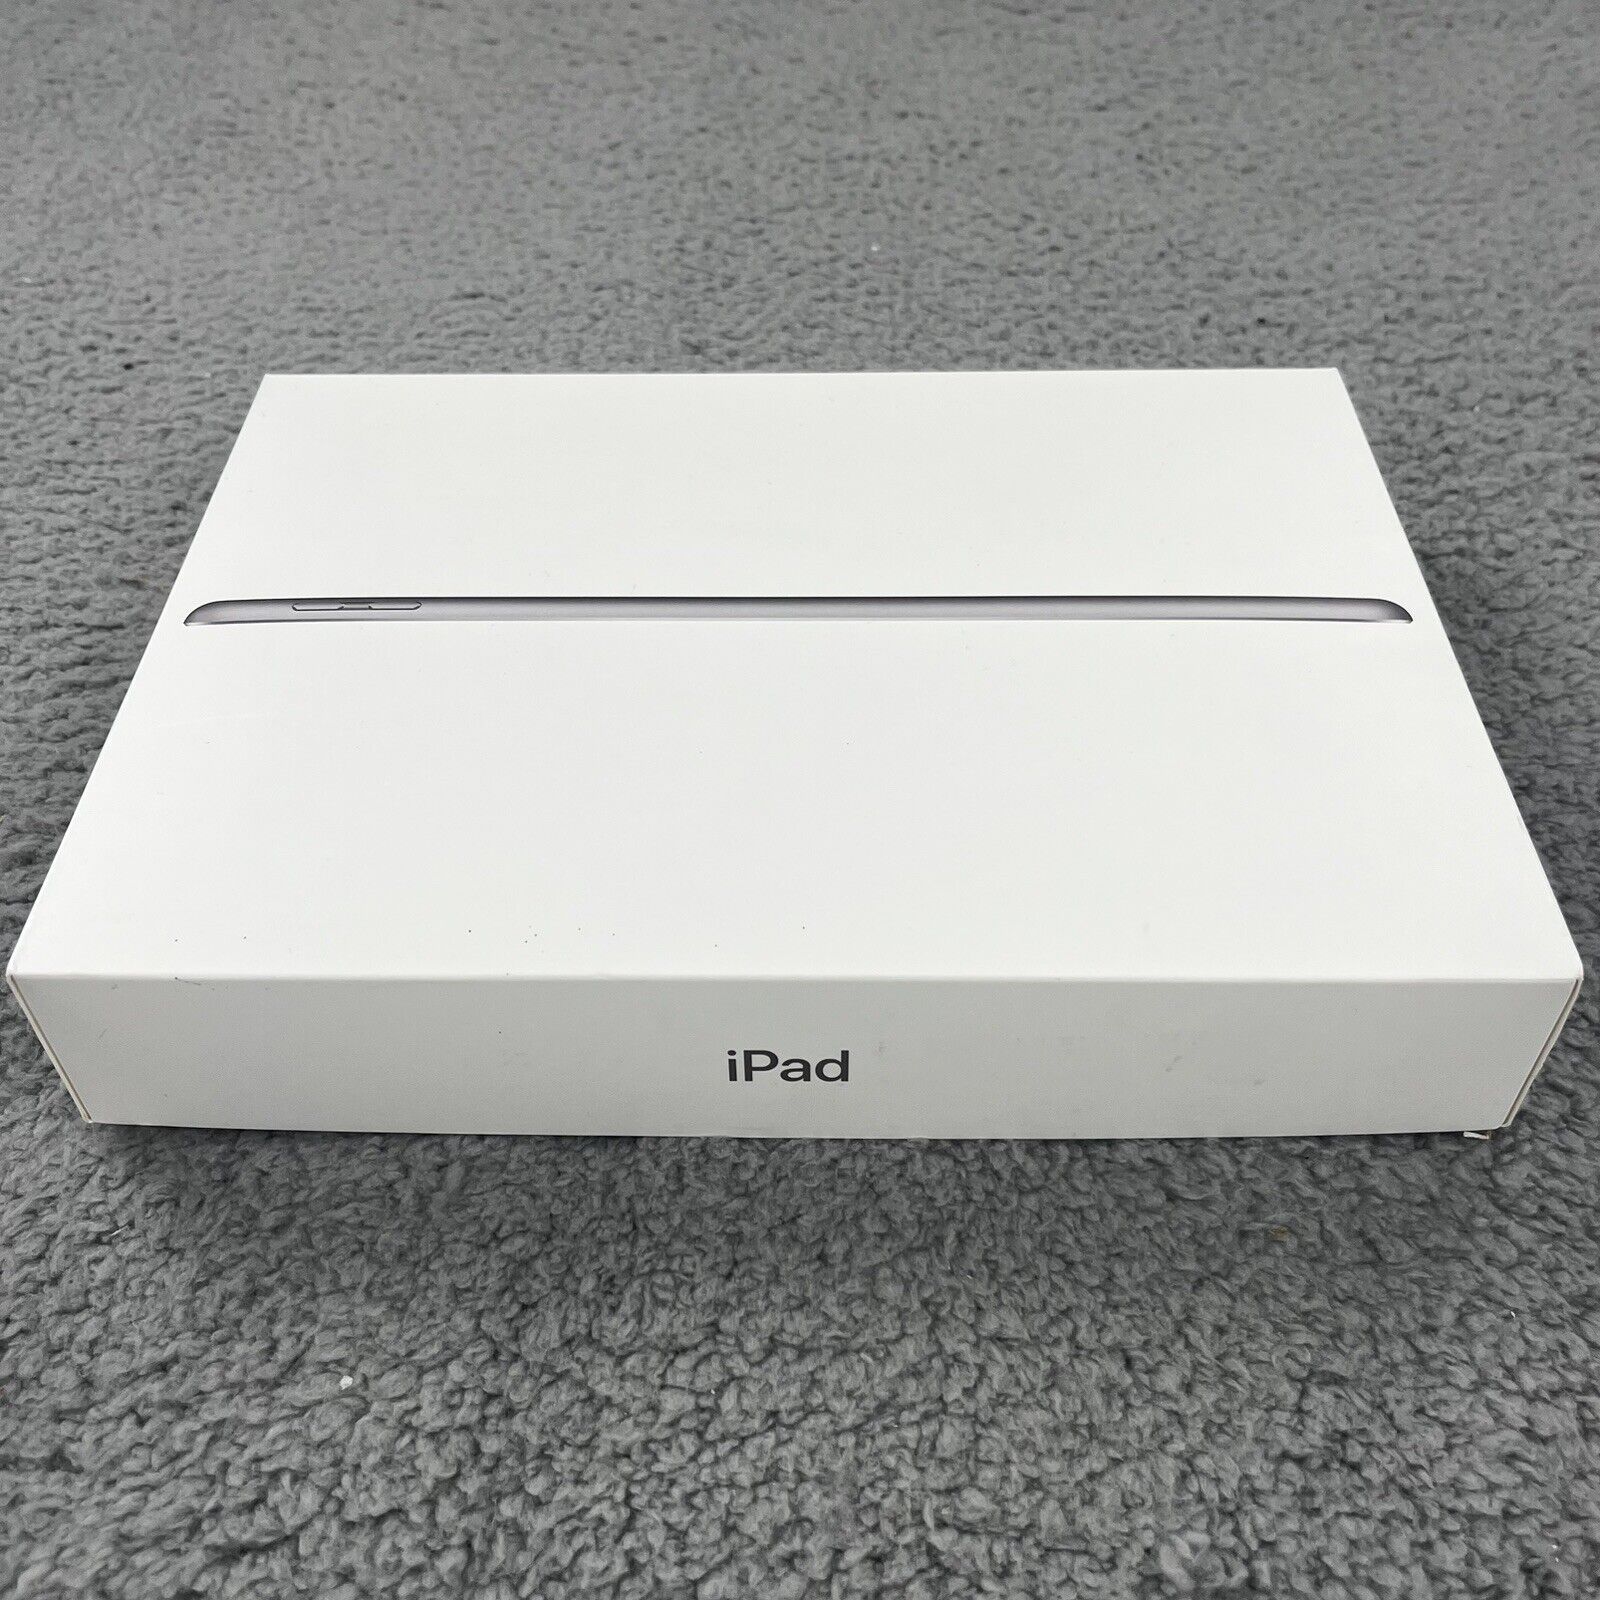 Apple iPad Air 2 Wi-Fi 32GB Space Gray Model A1822 EMPTY BOX ONLY Apple Stickers